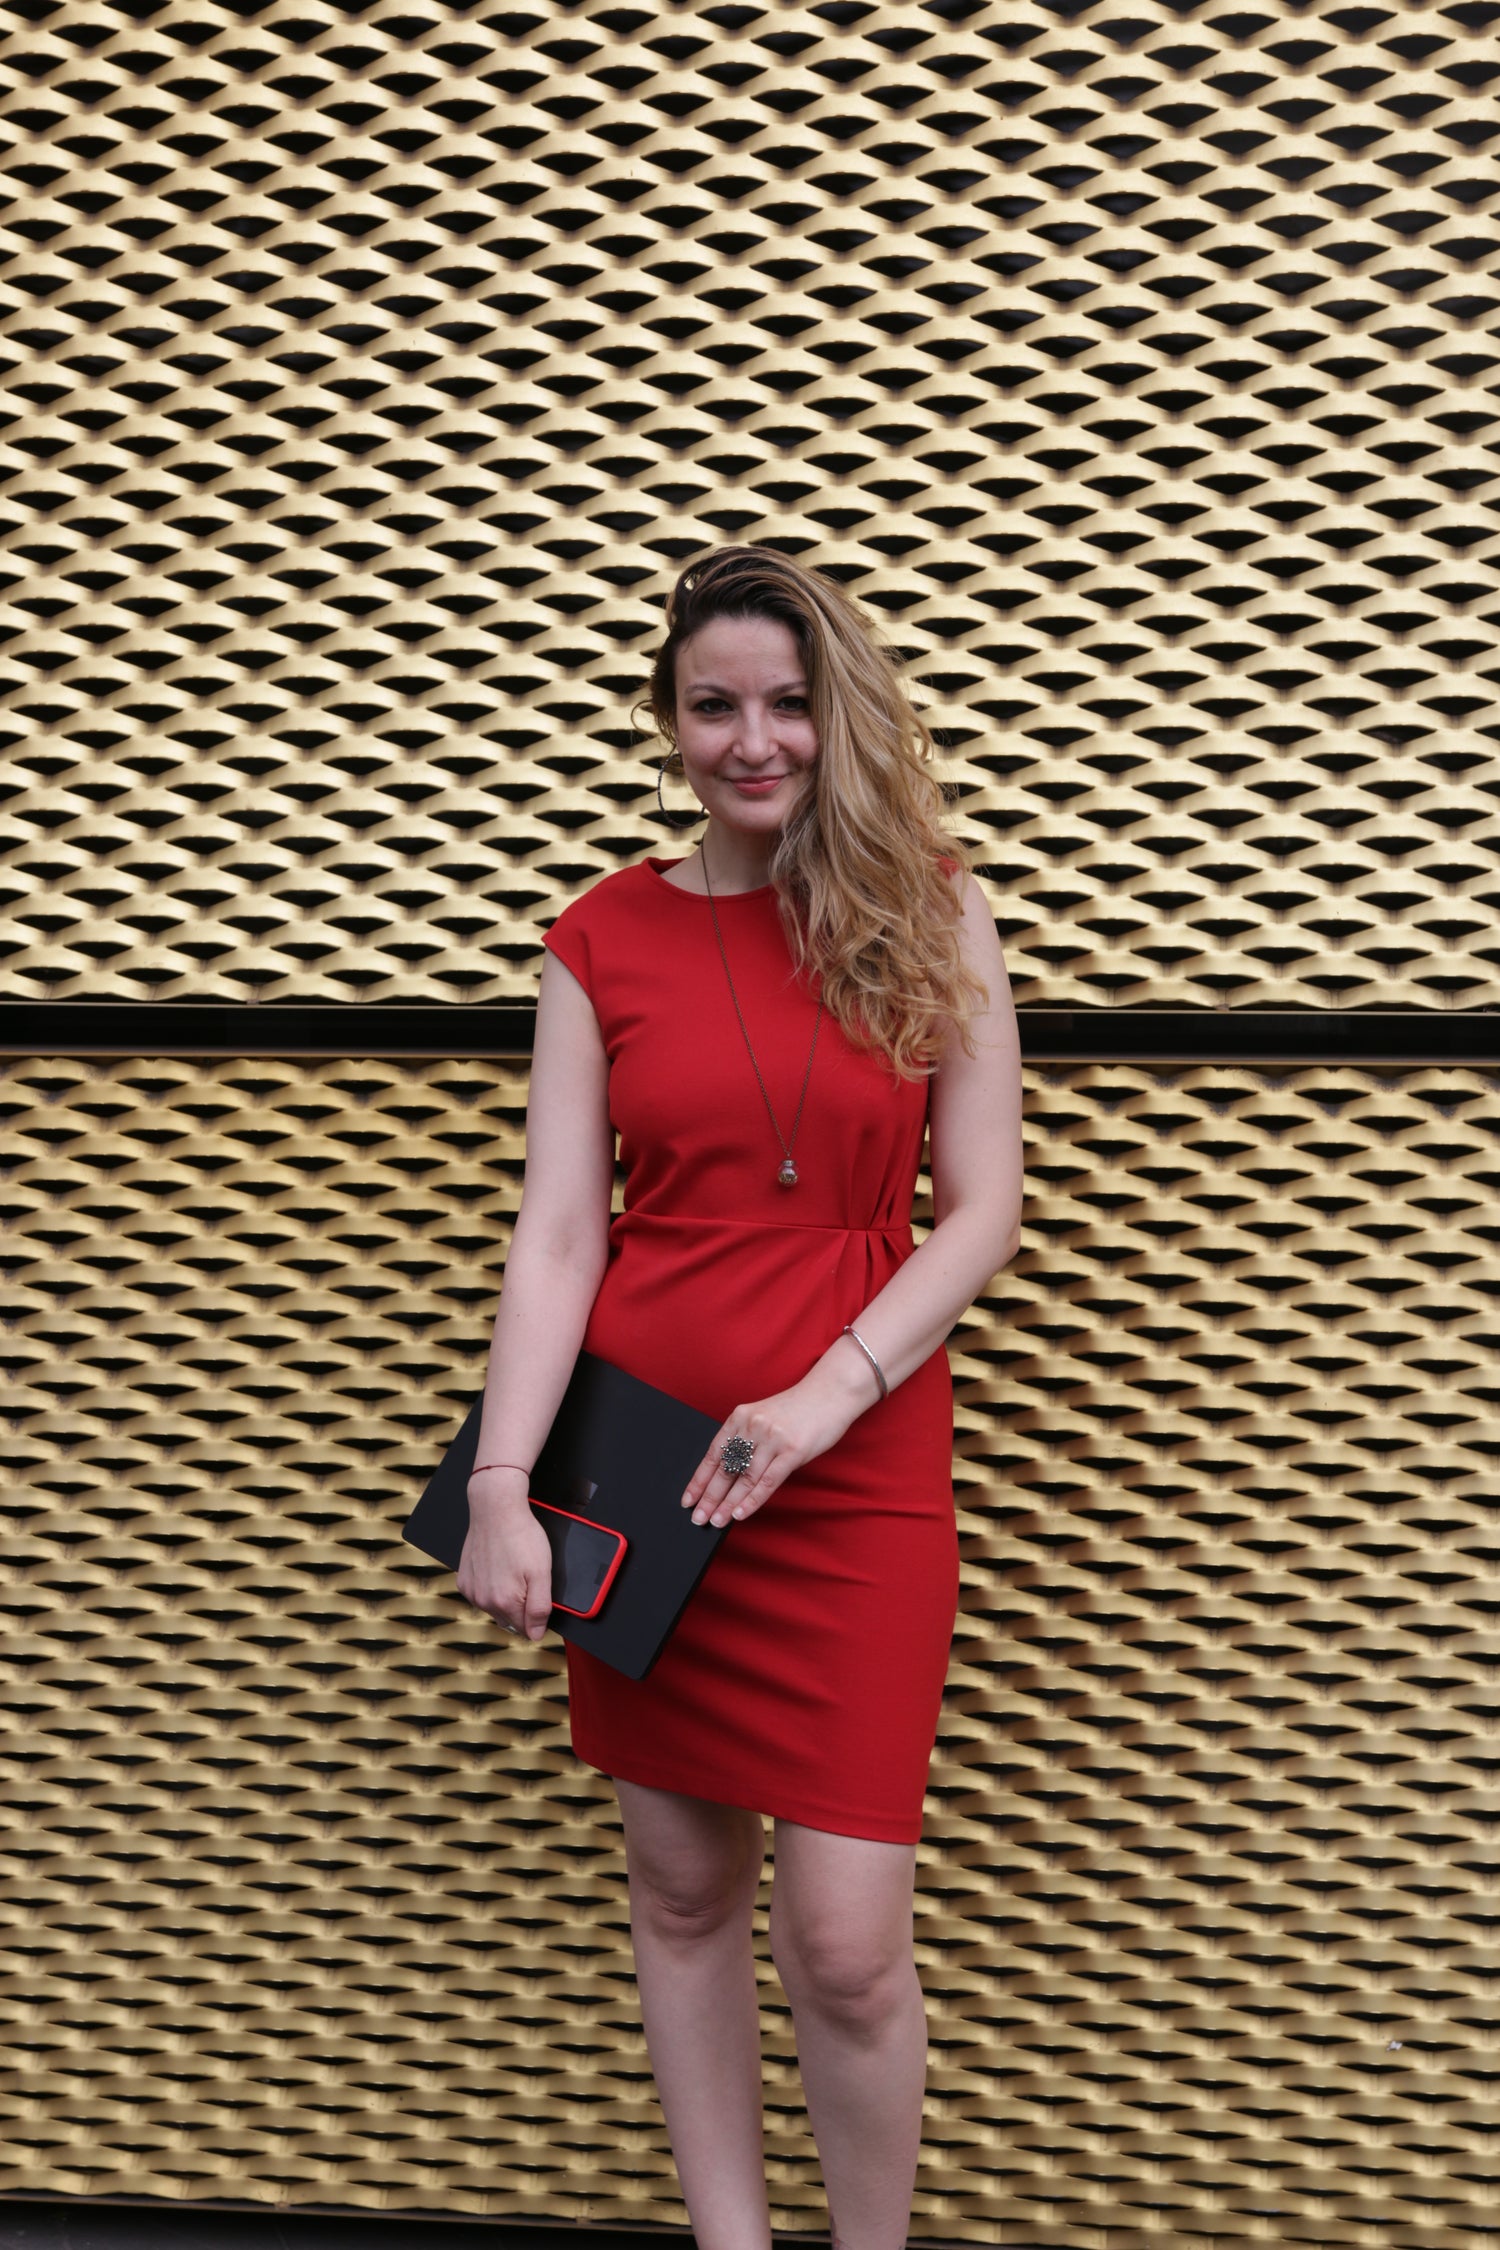 Ioana wearing a red dress against a gold background holding her laptop and phone